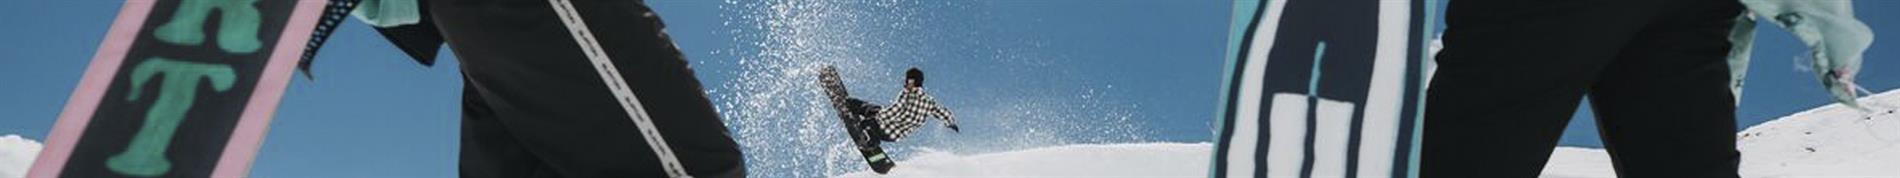 Rome Snowboards High-Performance Snowboards for Kids 